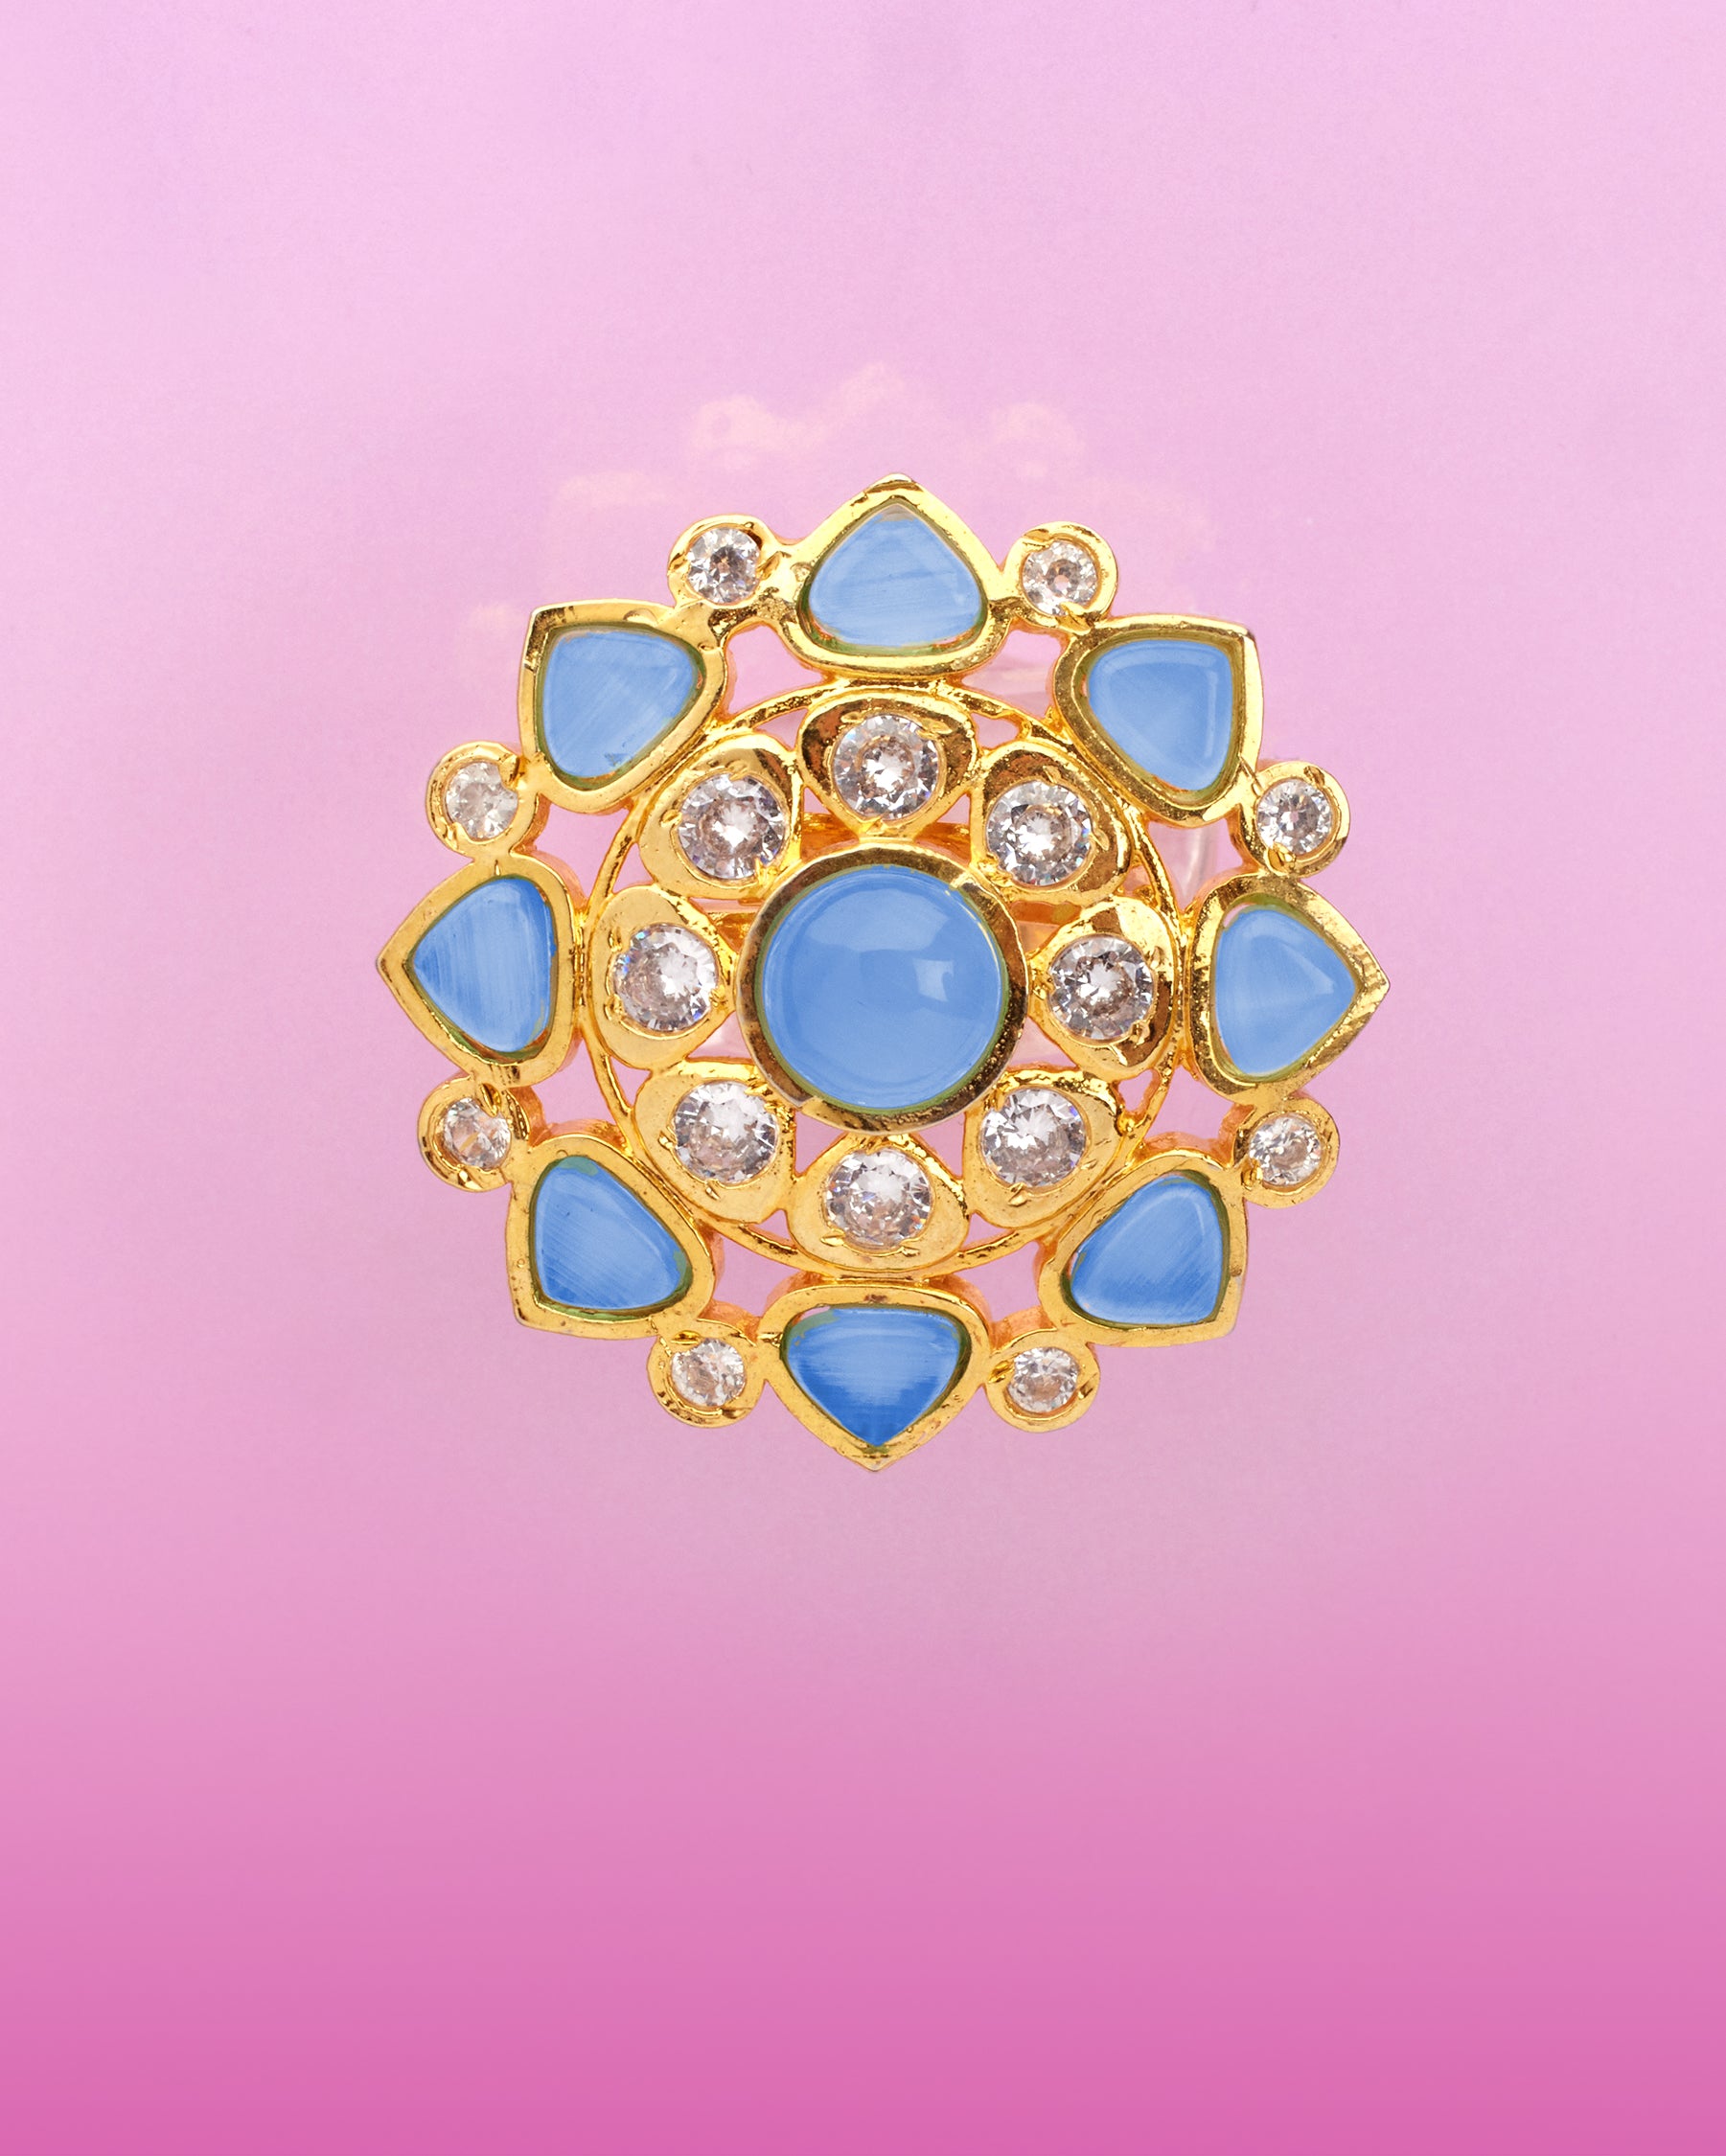 Carabella Ring in Sky Blue Cabouchon-Full Image